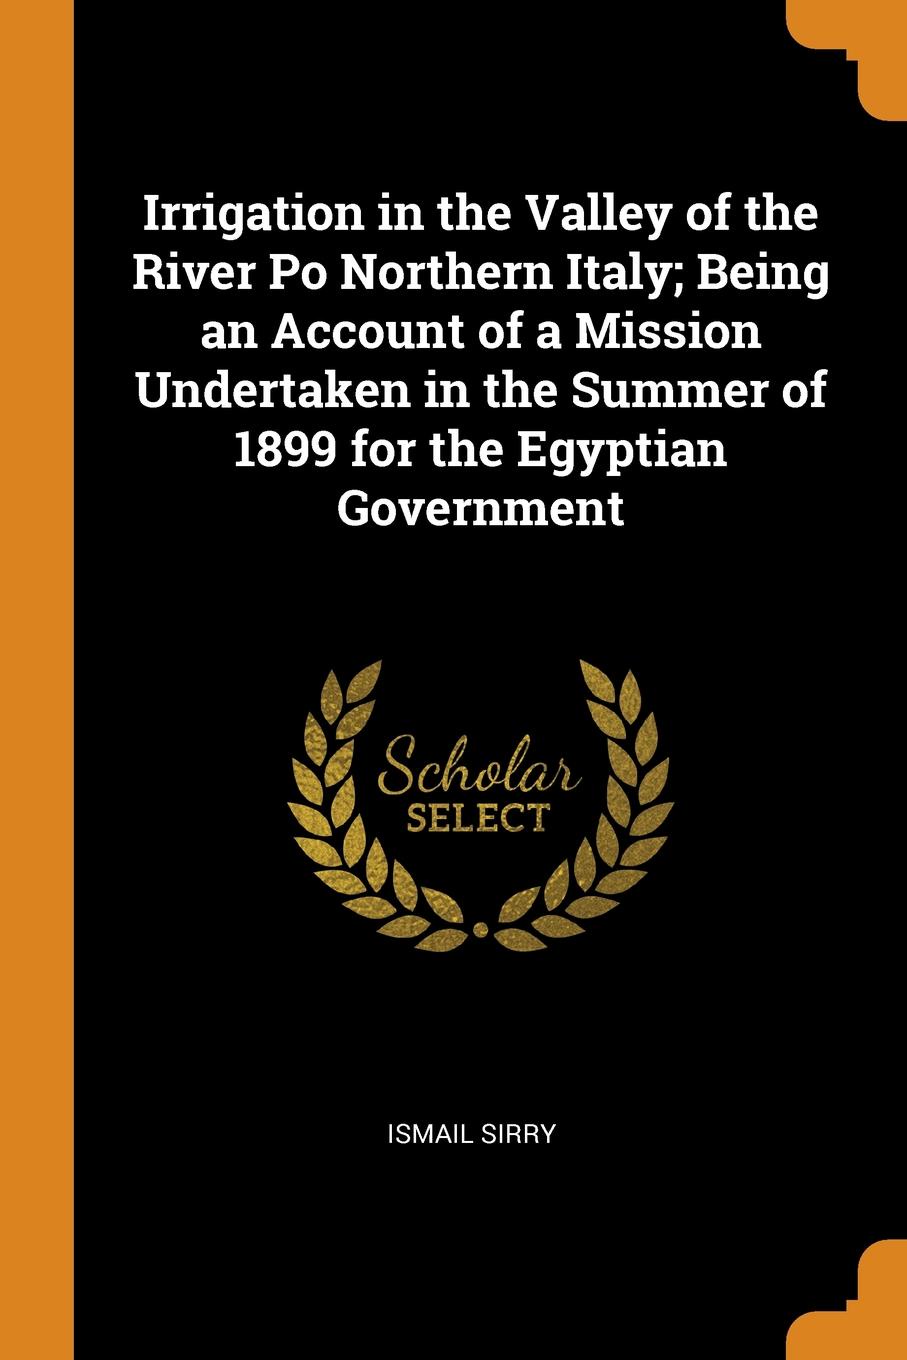 Irrigation in the Valley of the River Po Northern Italy; Being an Account of a Mission Undertaken in the Summer of 1899 for the Egyptian Government